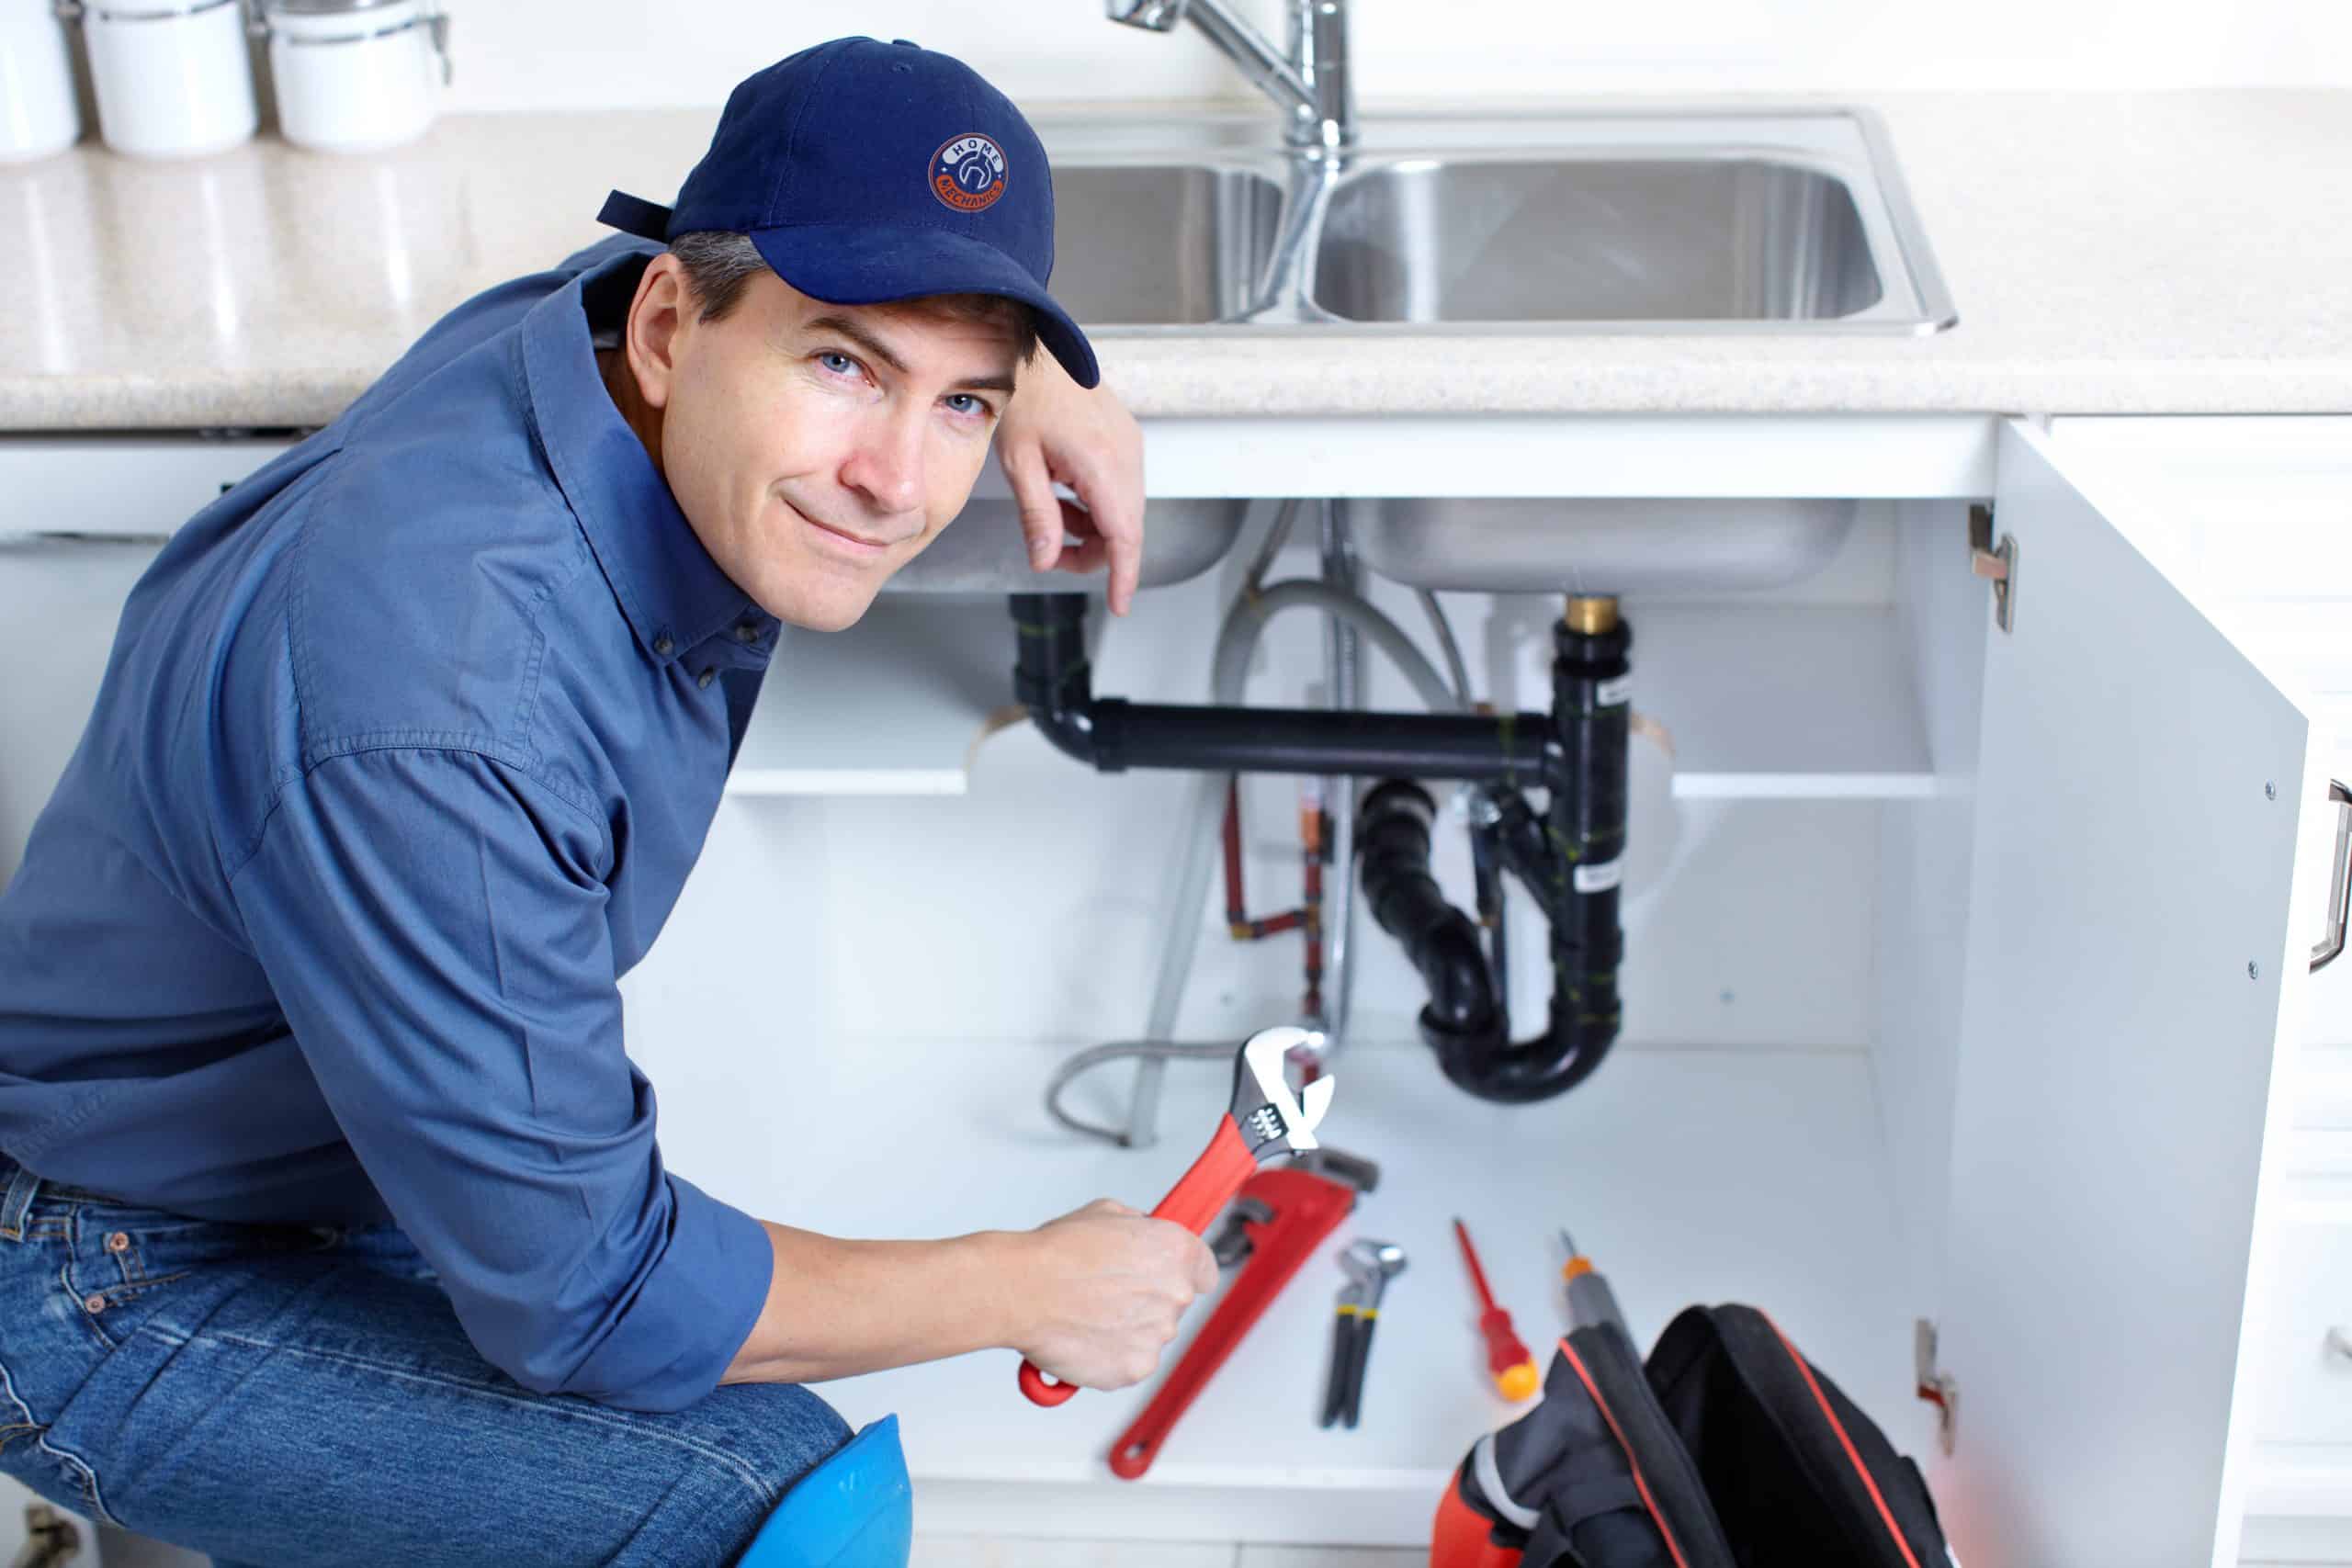 Plumbing services by Home Mechanics